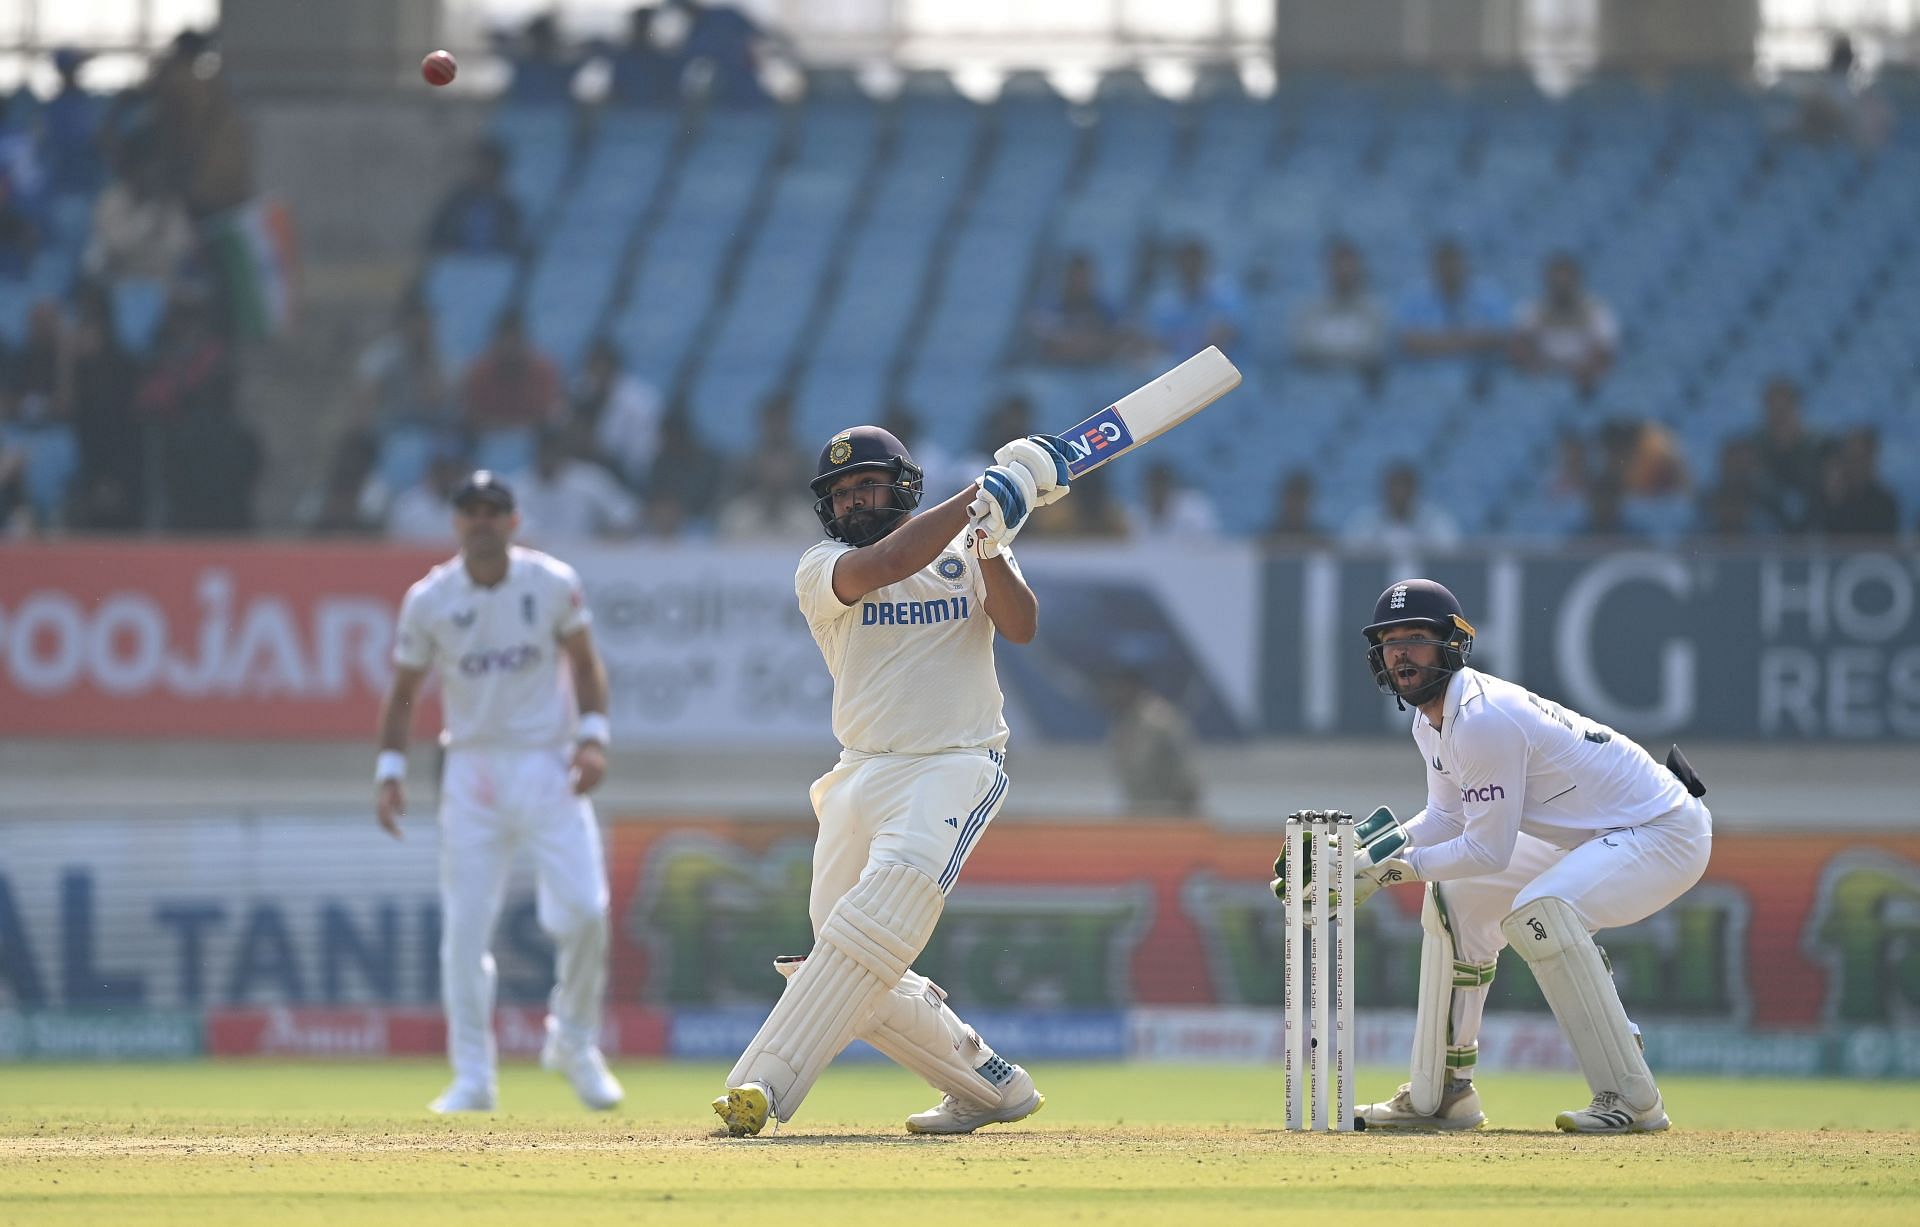 Rohit Sharma struck 14 fours and three sixes during his innings. [P/C: Getty]